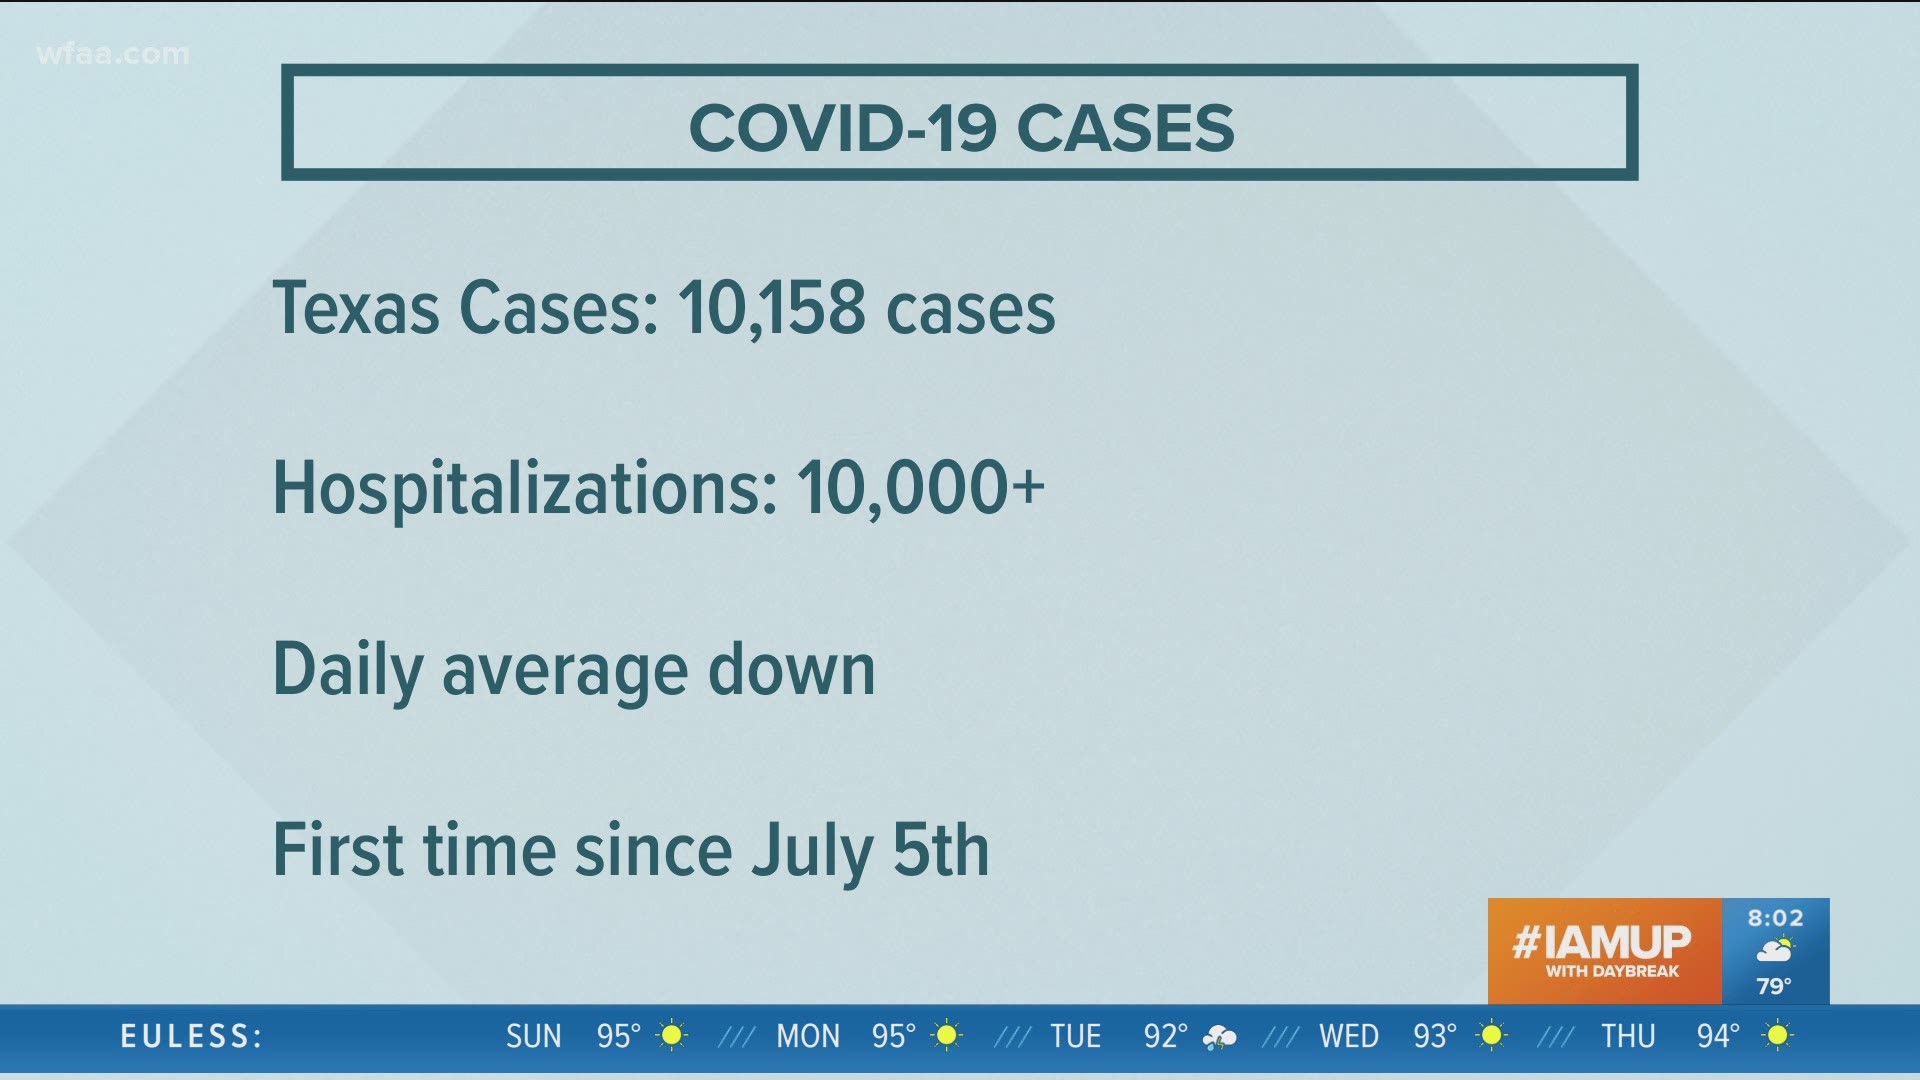 Dozens of babies have tested positive for COVID-19 in Corpus Christi. Officials aren't sure why, but believe it may be due to widespread infection in the community.